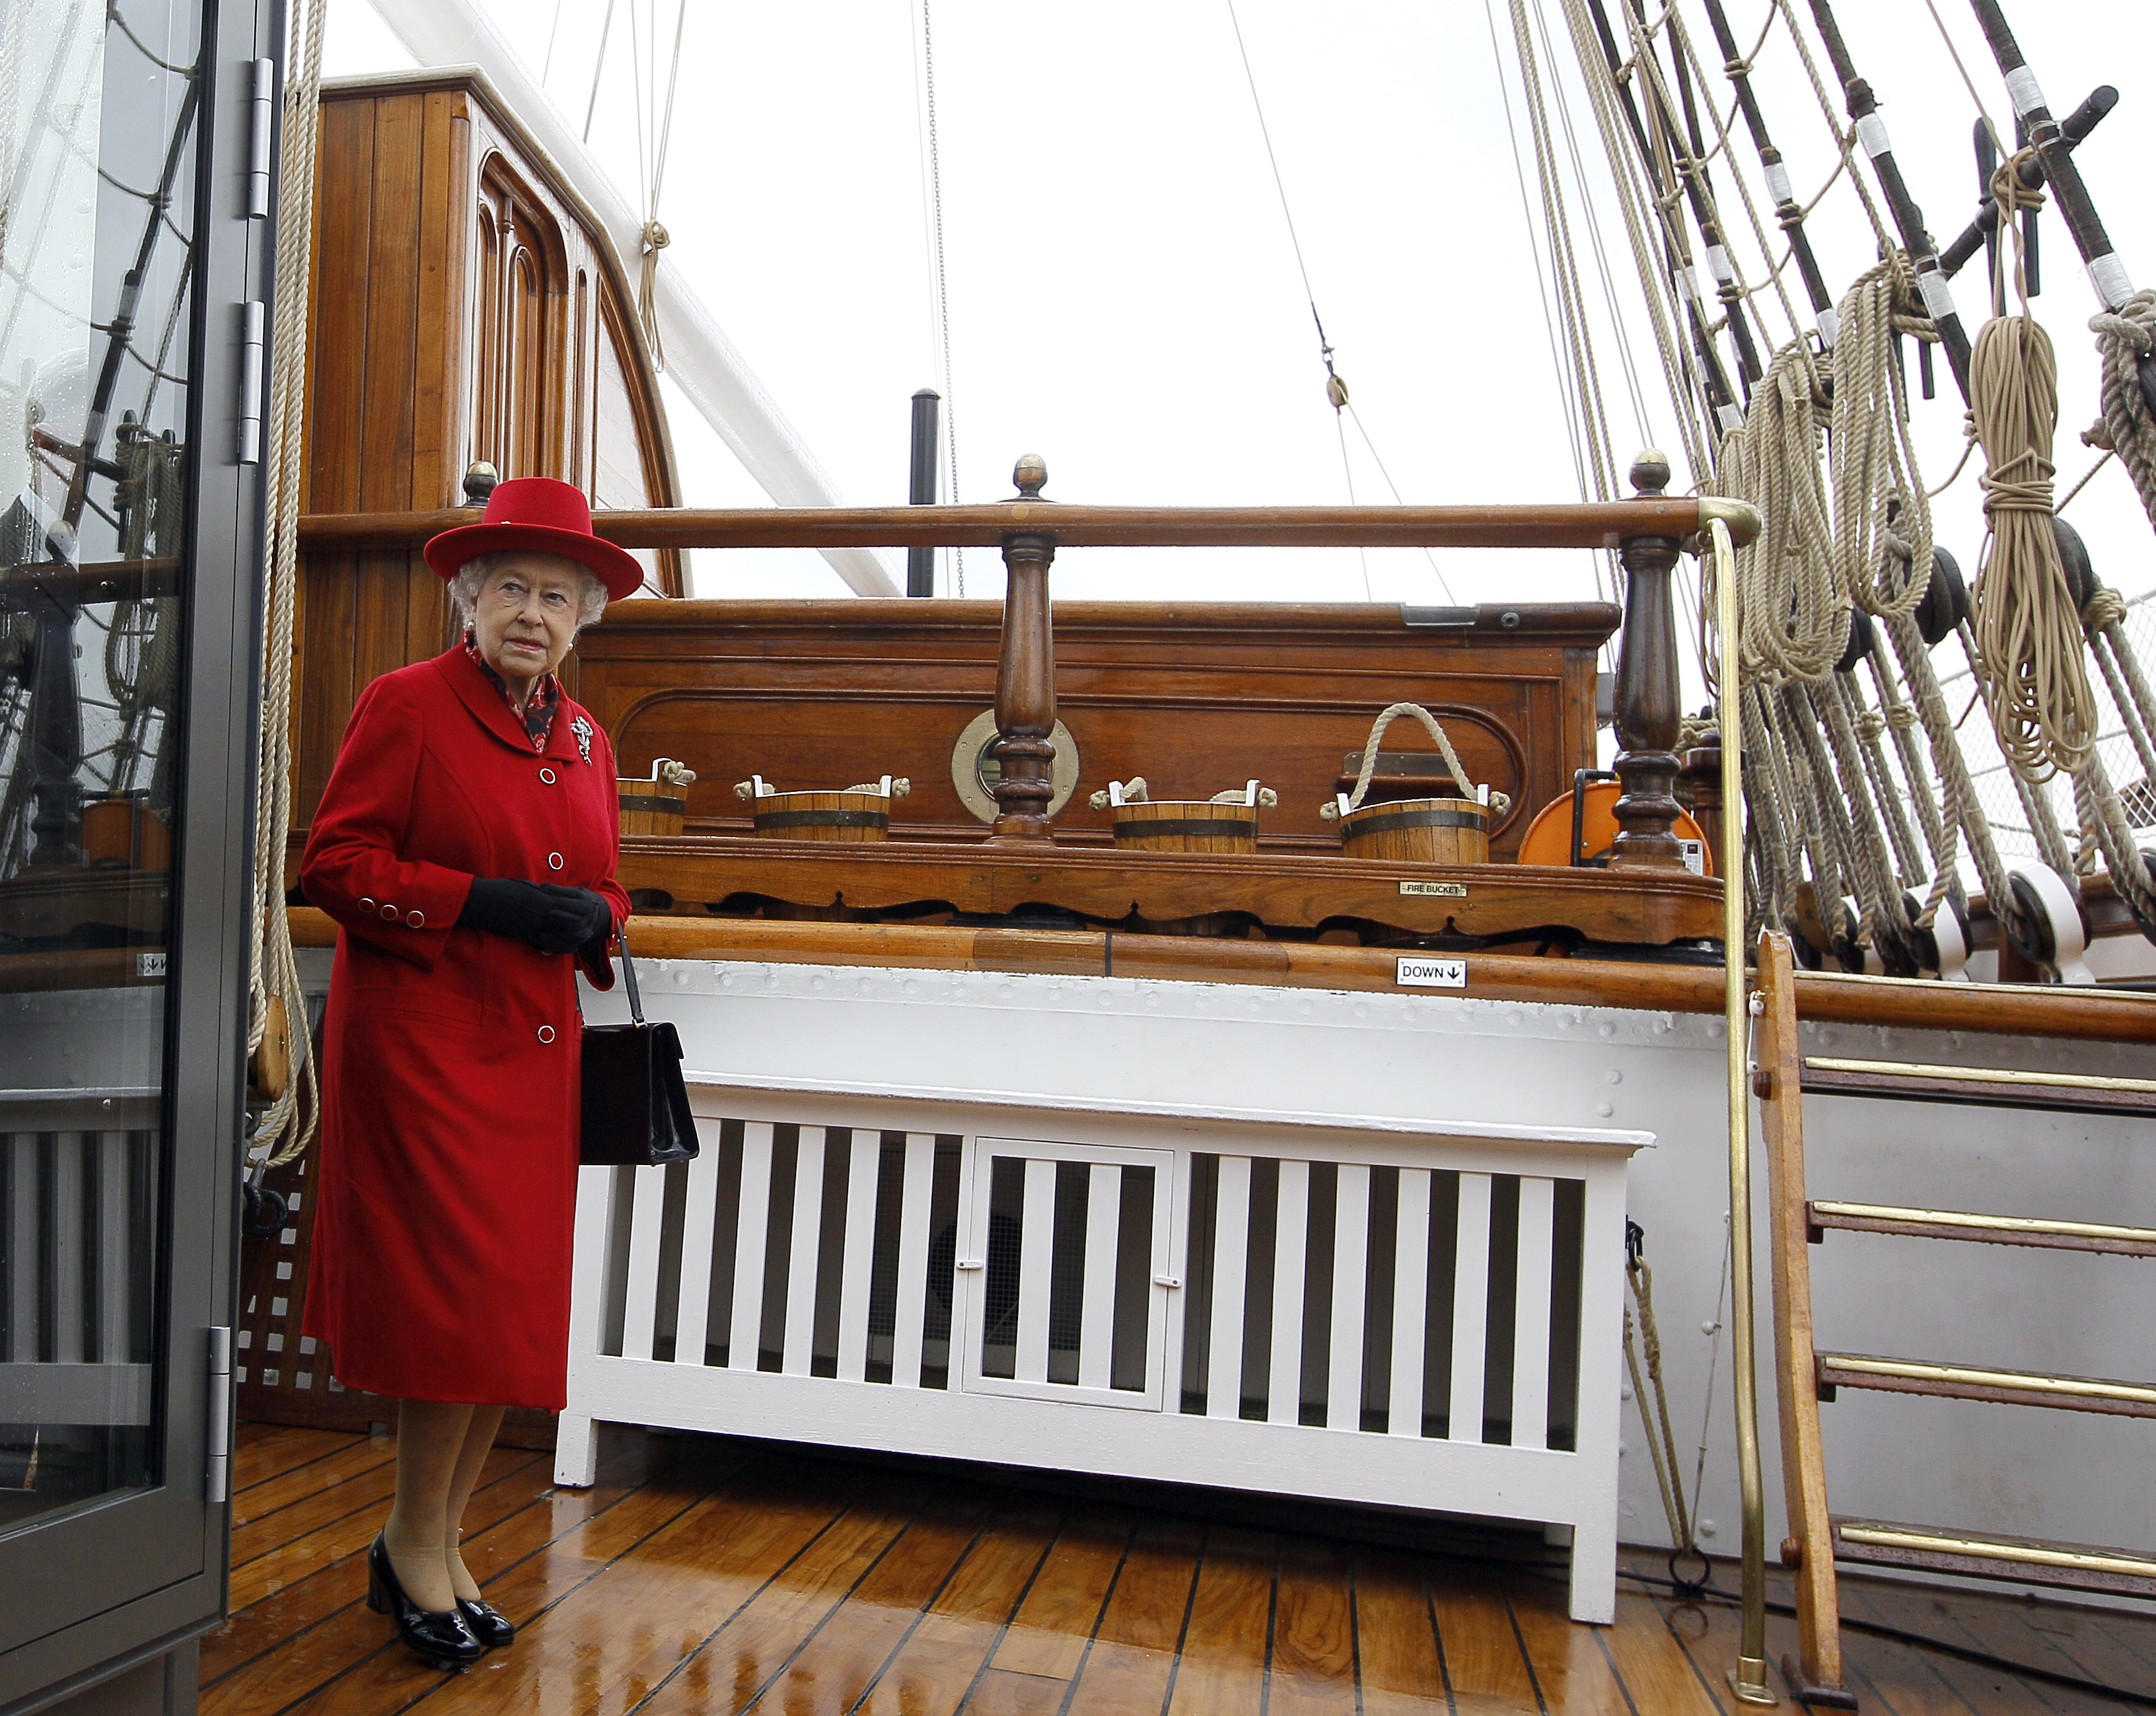 Queen Reopens The Restored Cutty Sark In Greenwich Cbs News